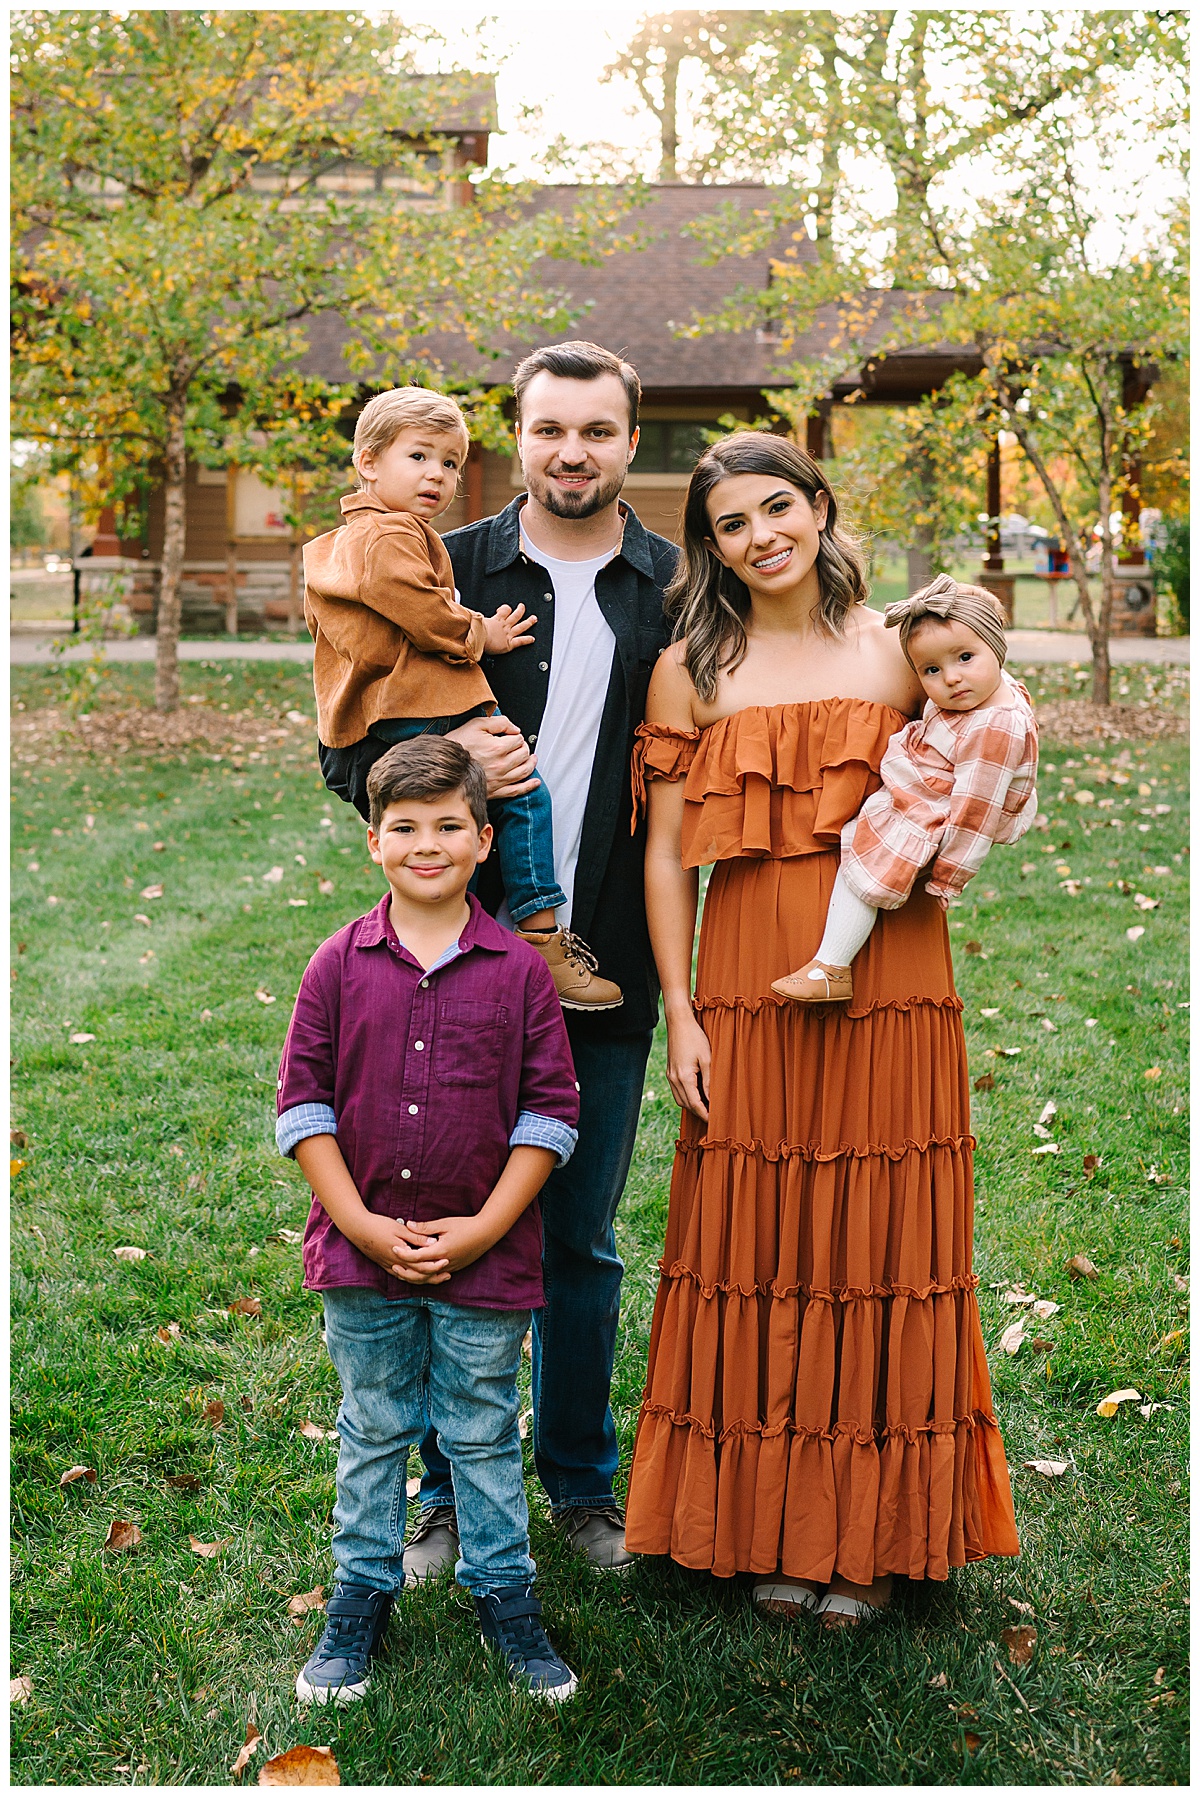 Beautiful group together for Oakland County Family Session